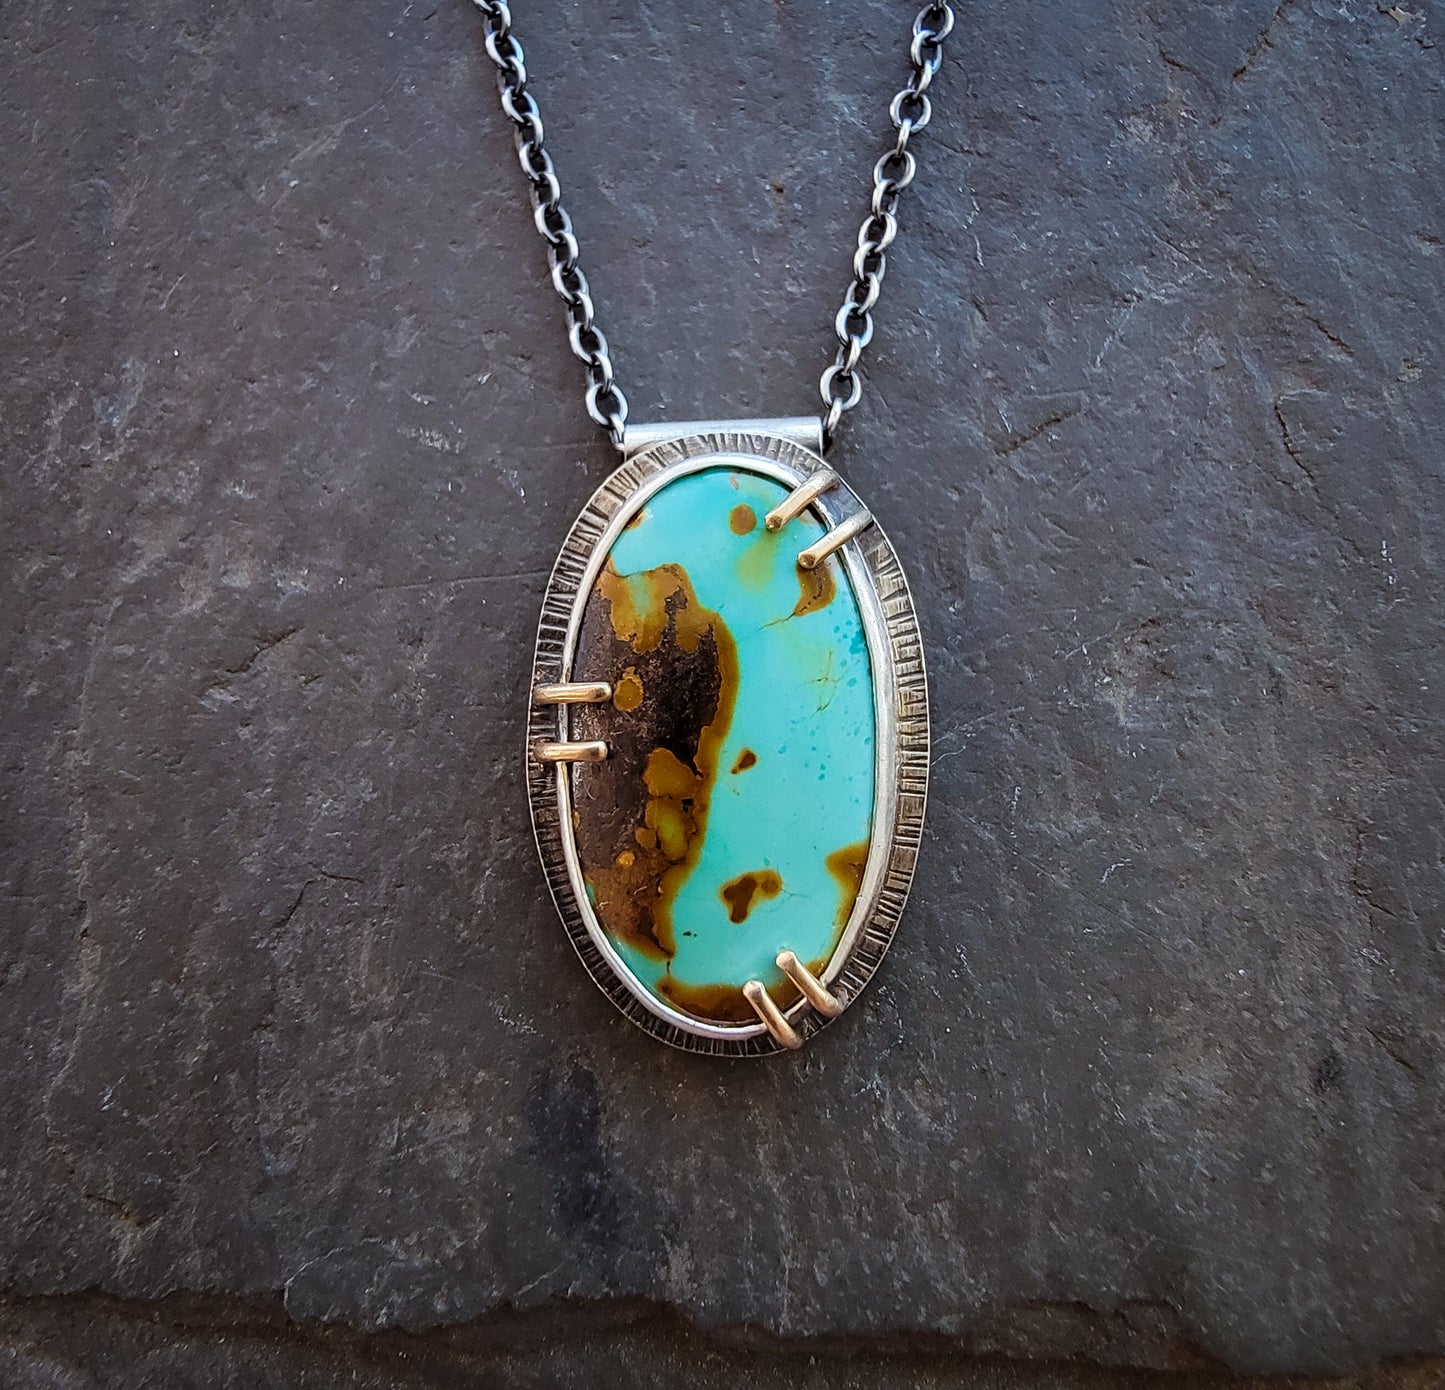 Turquoise Necklace with Gold Prongs